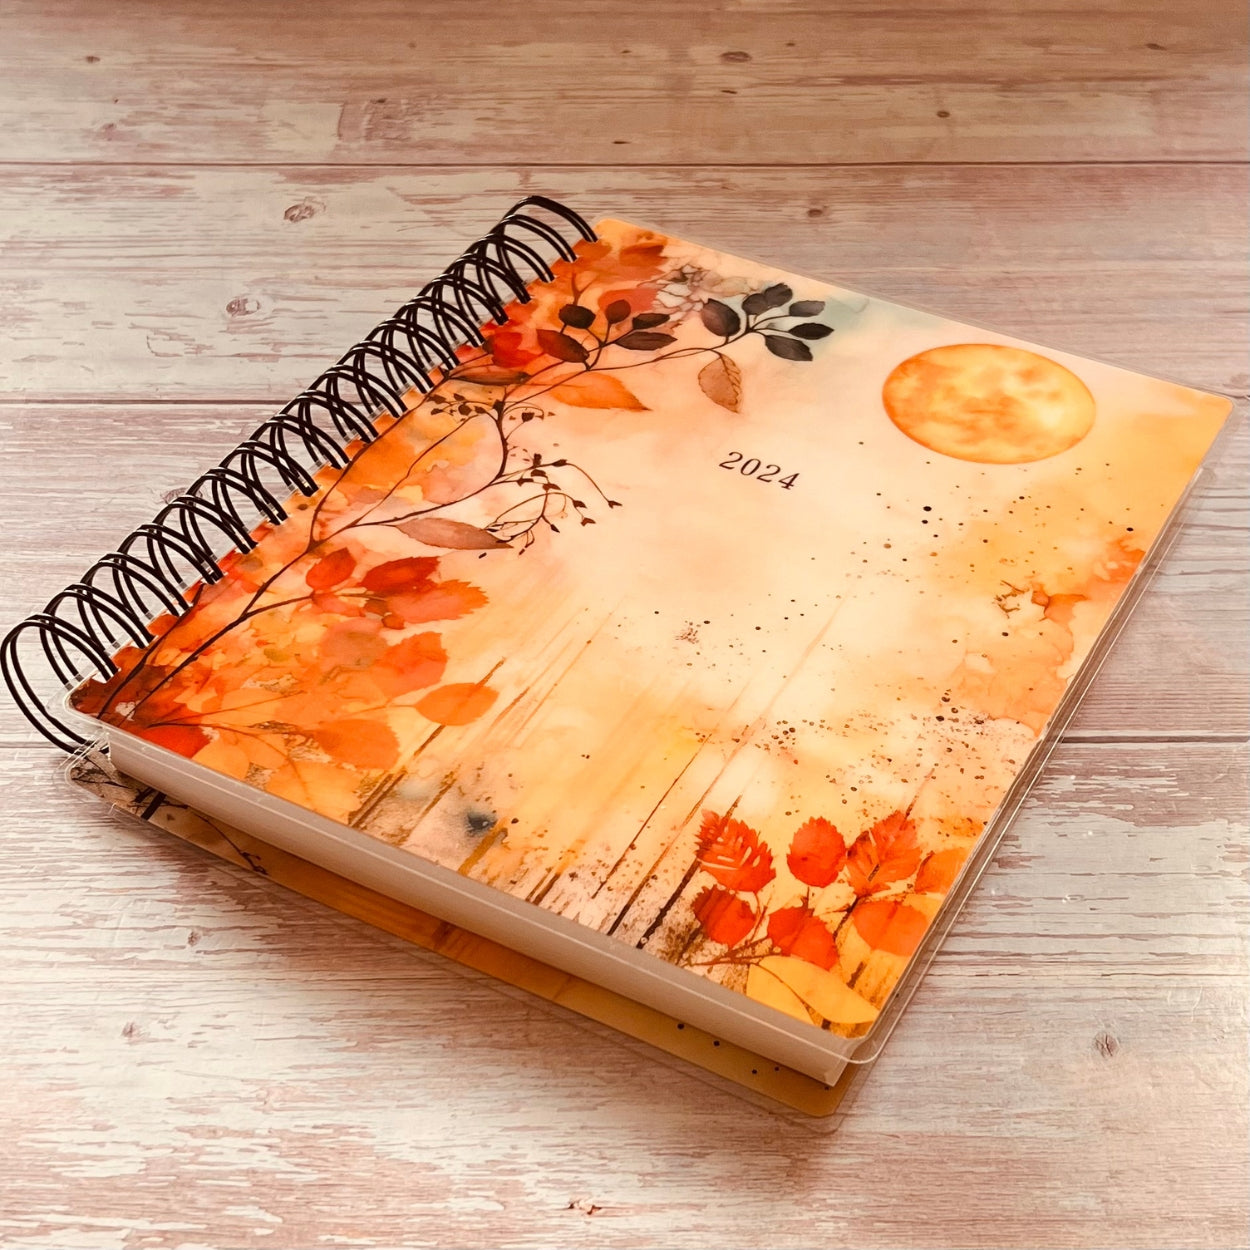 Personalized Weekly Planner | Harvest Moon